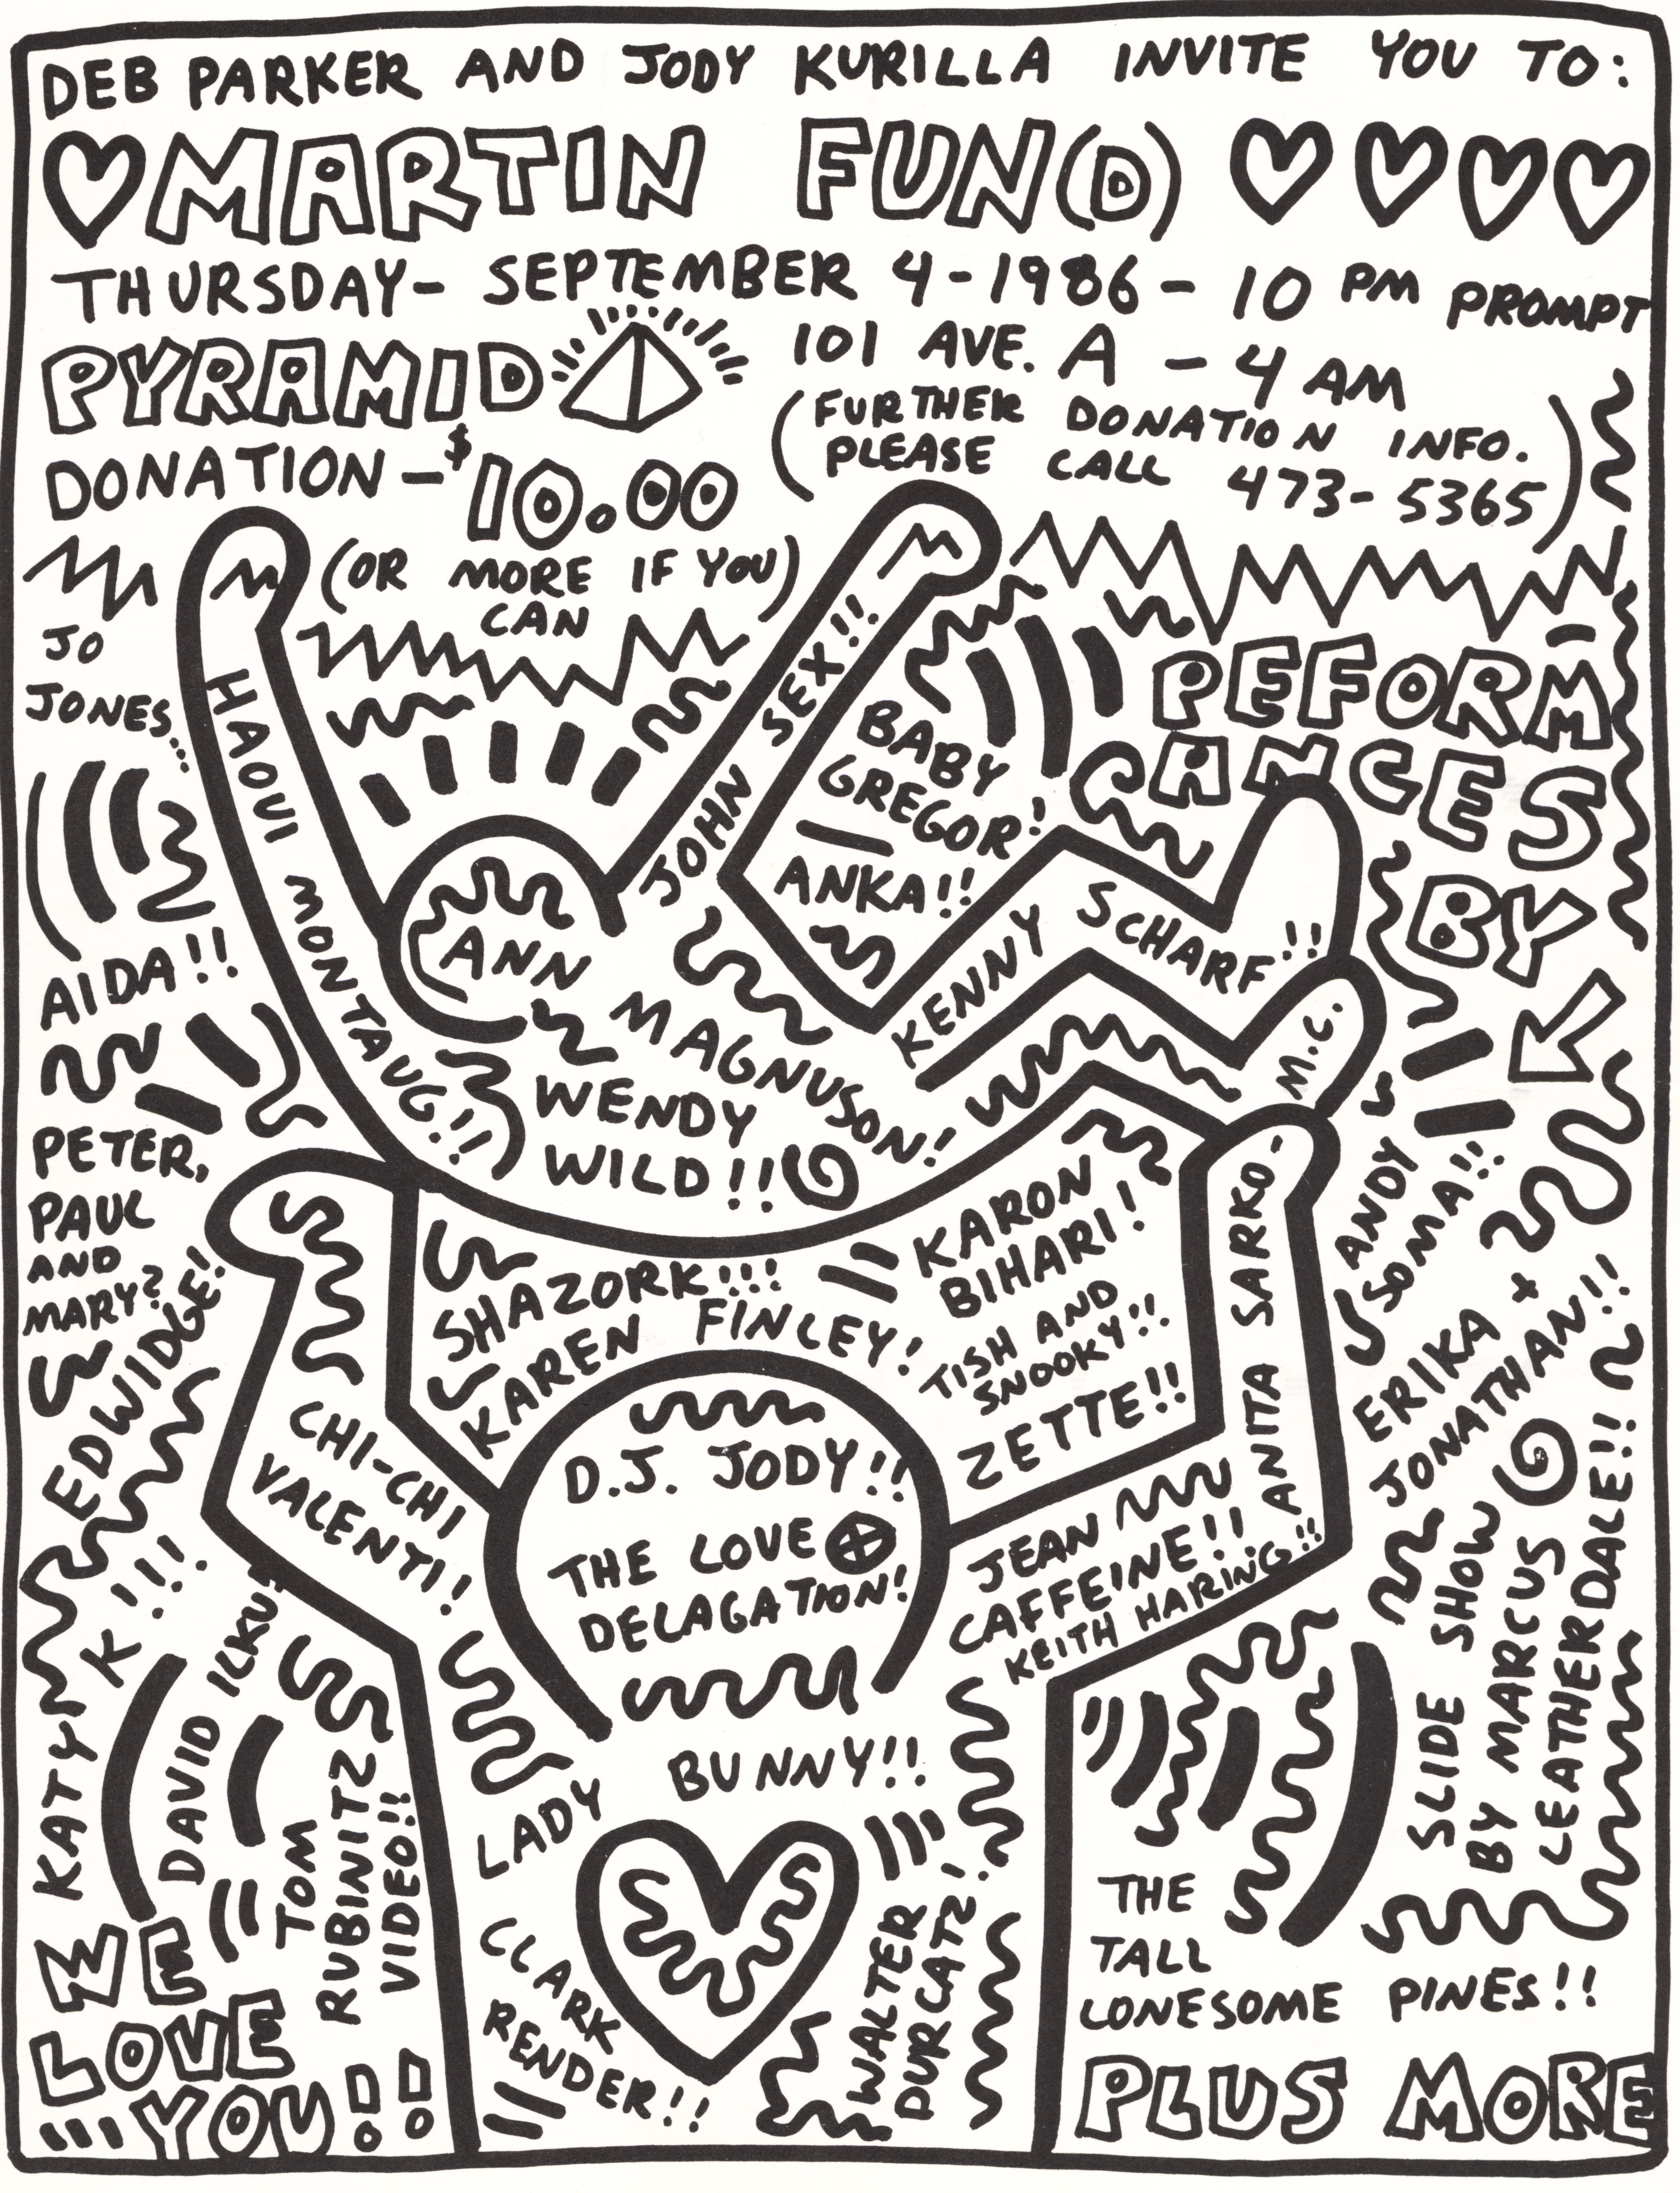 Keith Haring, Andy Warhol 1986:
Rare, highly sought-after oversized 1986 folding announcement card / poster illustrated by Keith Haring & Andy Warhol (reverse side). This seldom available piece was illustrated by Haring & Warhol on the occasion of: